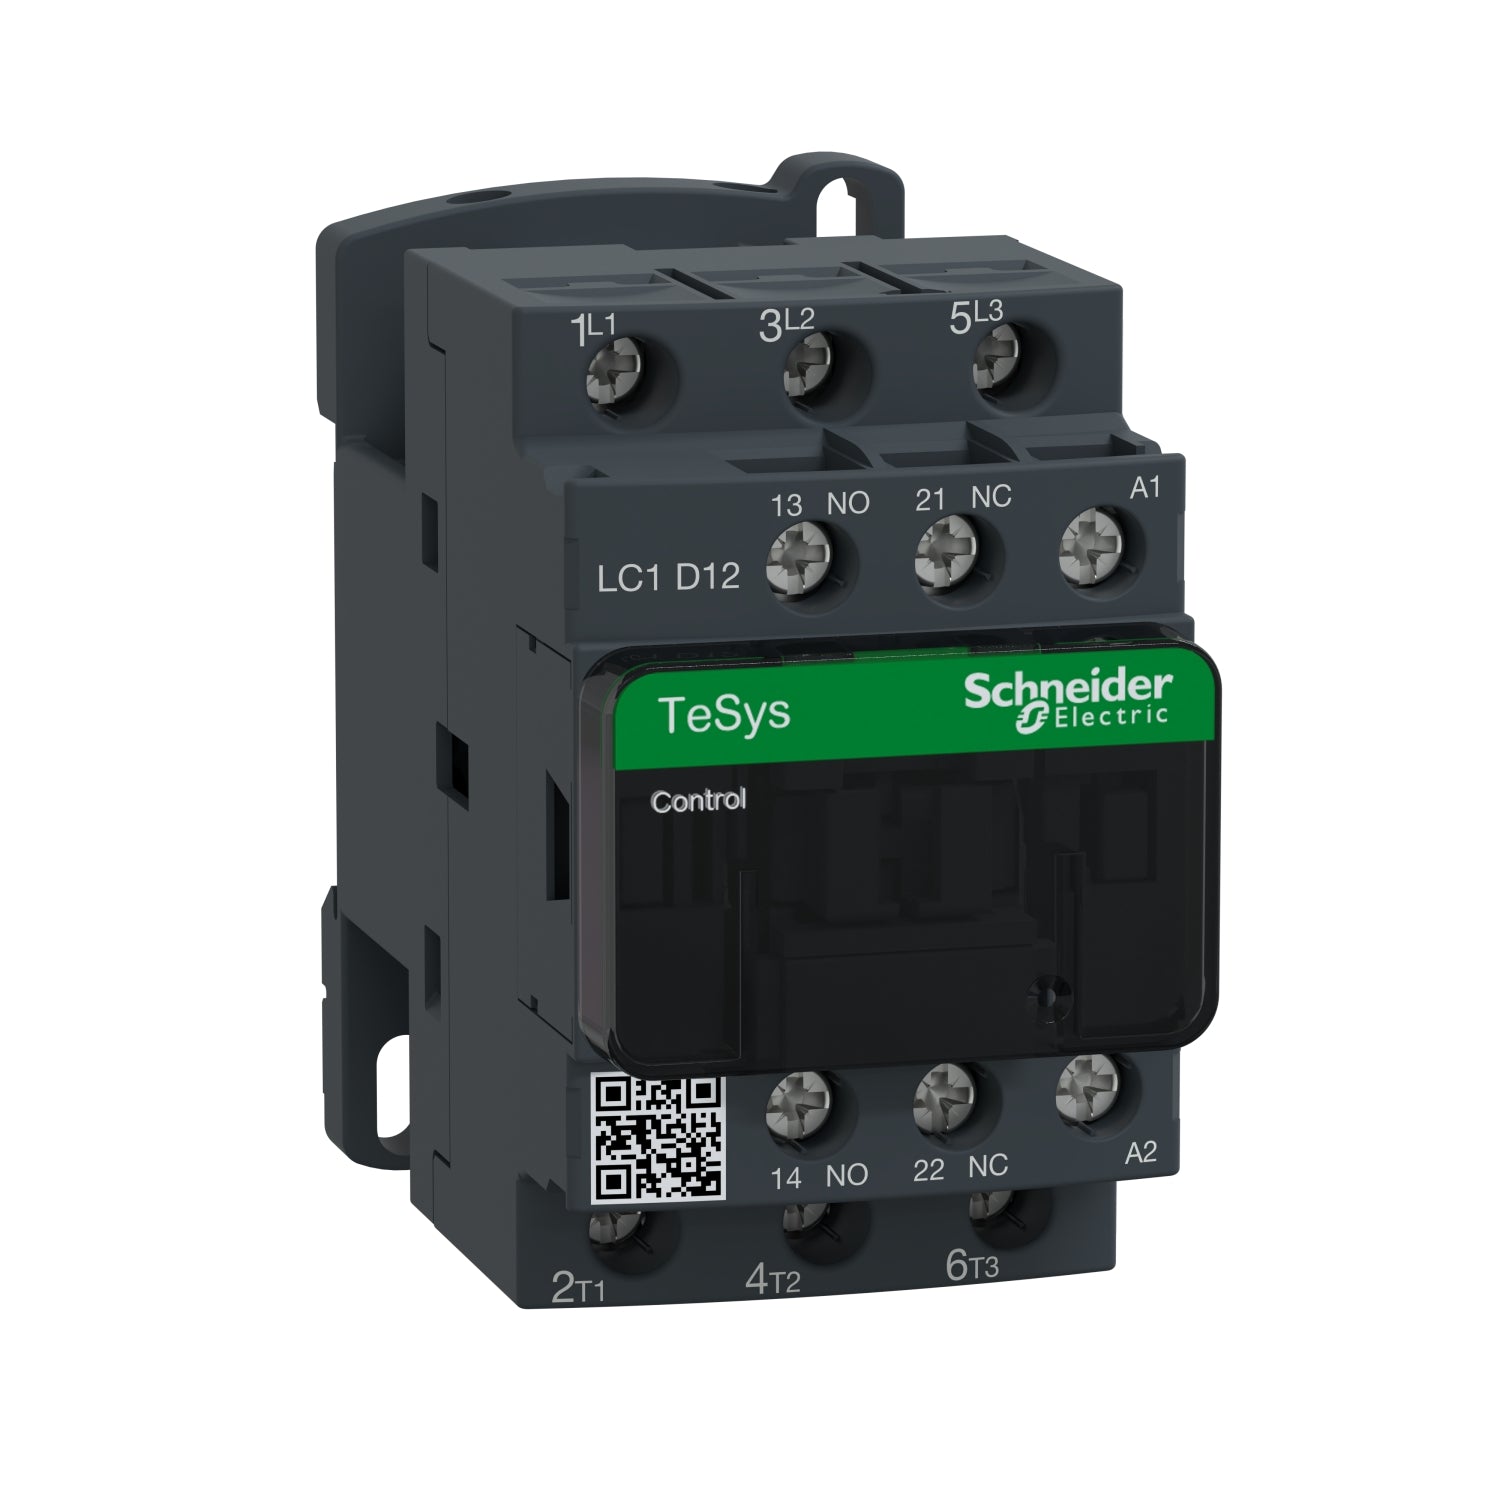 LC1D12B7 | Schneider Electric IEC contactor, TeSys Deca, nonreversing, 12A, 7.5HP at 480VAC, up to 100kA SCCR, 3 phase, 3 NO, 24VAC 50/60Hz coil, open